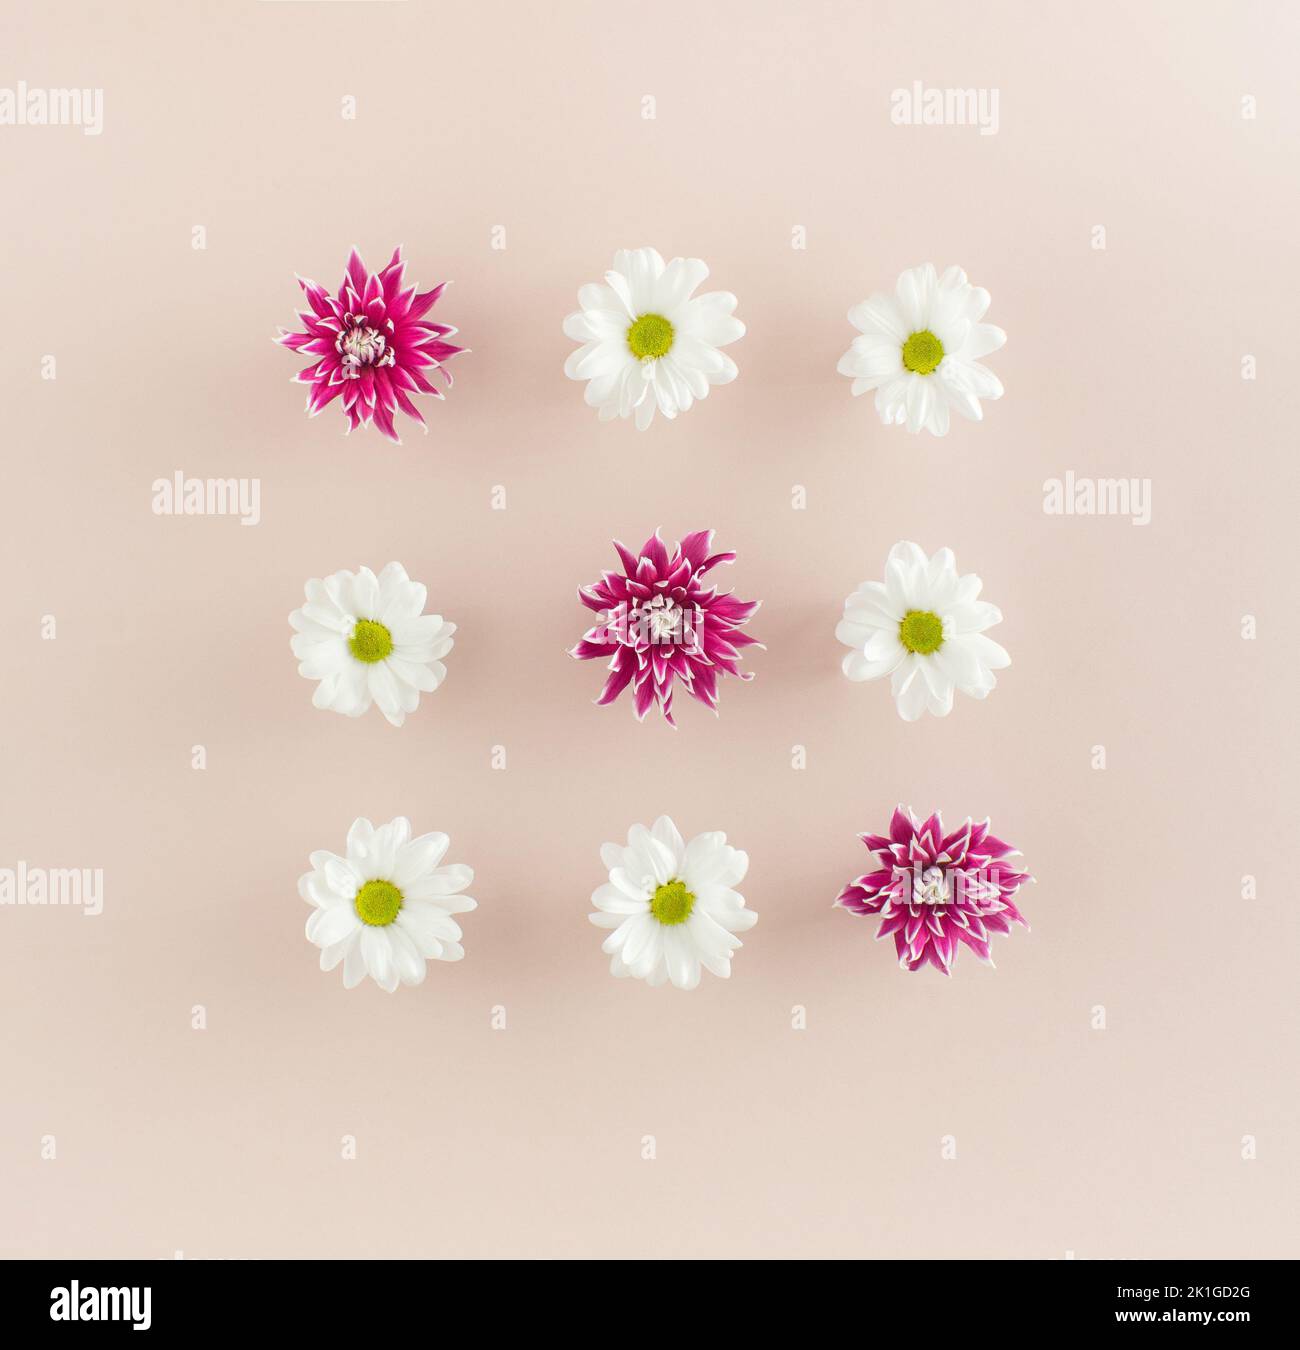 Flowers of white marguerite daisies and purple dahlias arranged in three rows of three flowers each on pink background. Stock Photo